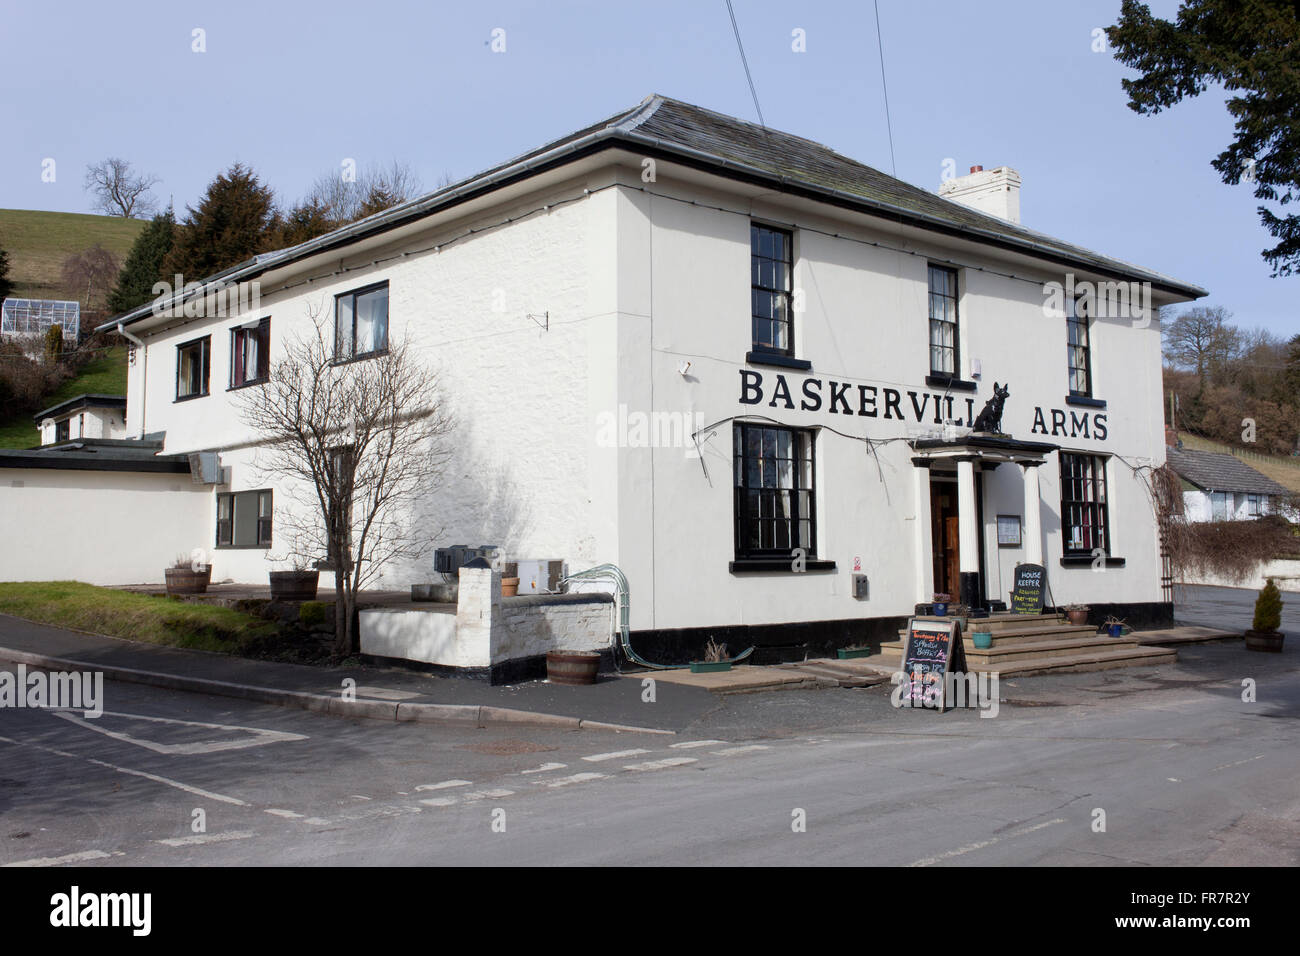 Baskerville Arme Wirtshaus in Clyro, Powys, Wales Stockfoto